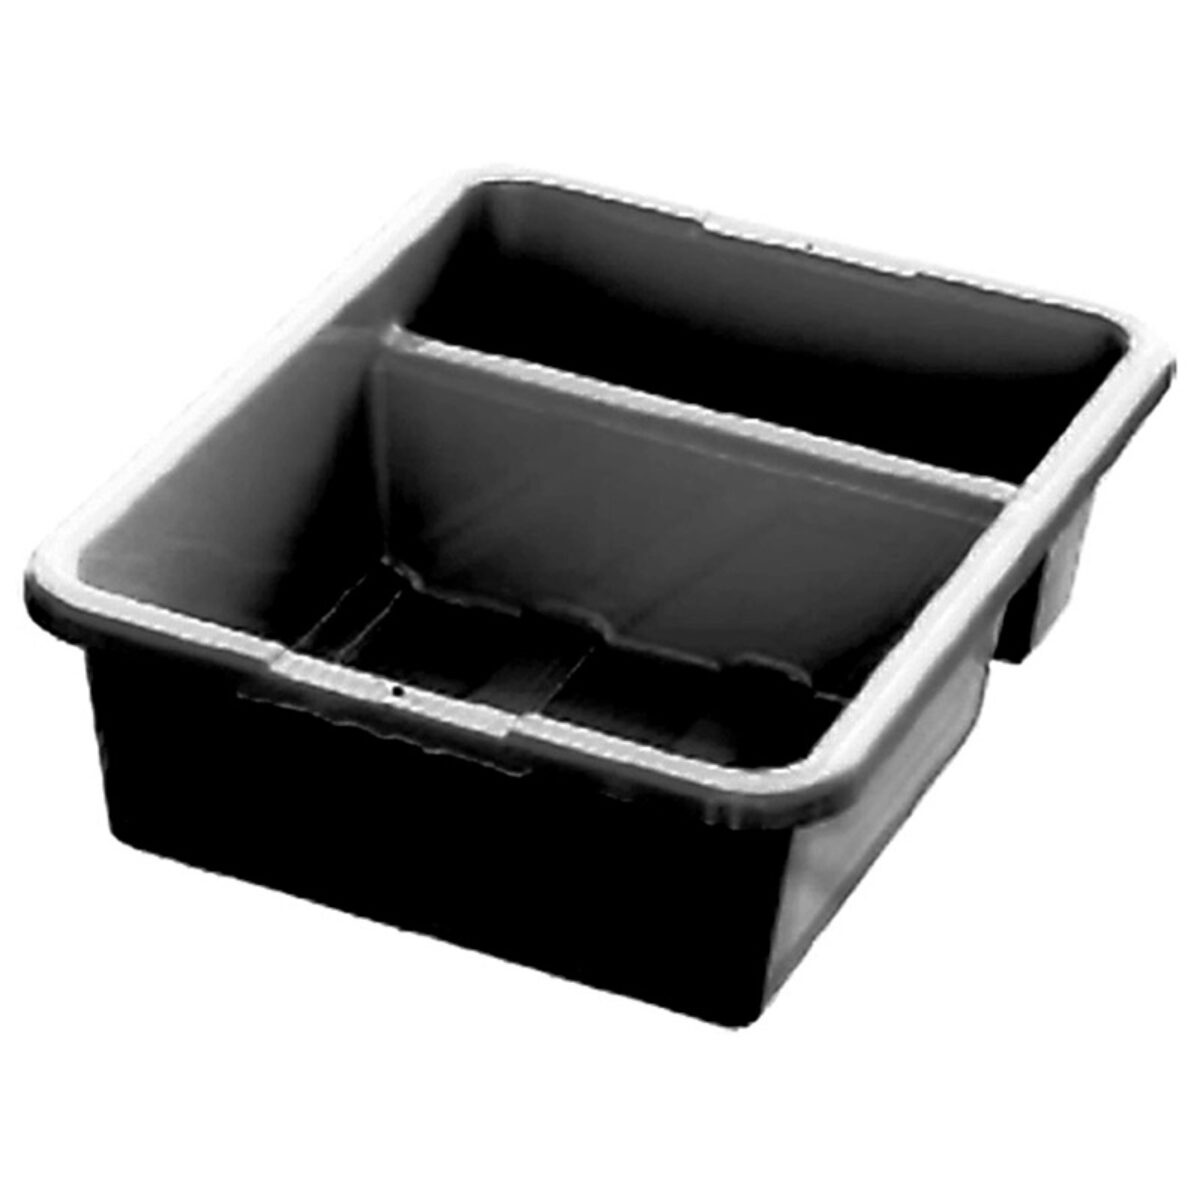  Oval plastic storage tubs with handle - Small size